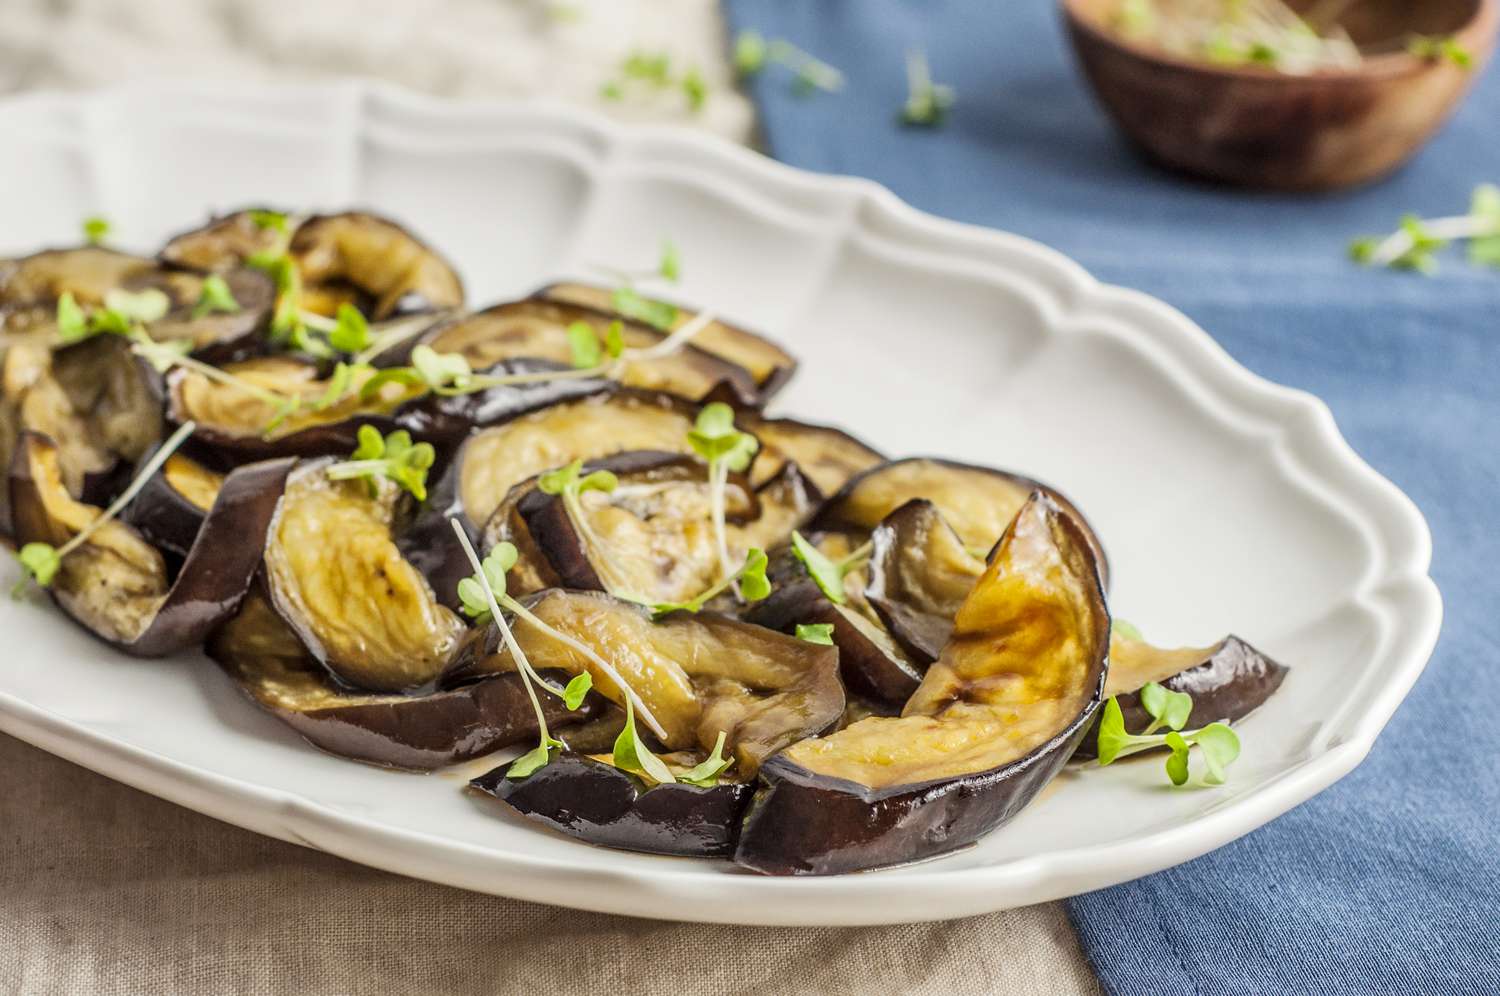 How To Roast Eggplant On Oven - Recipes.net